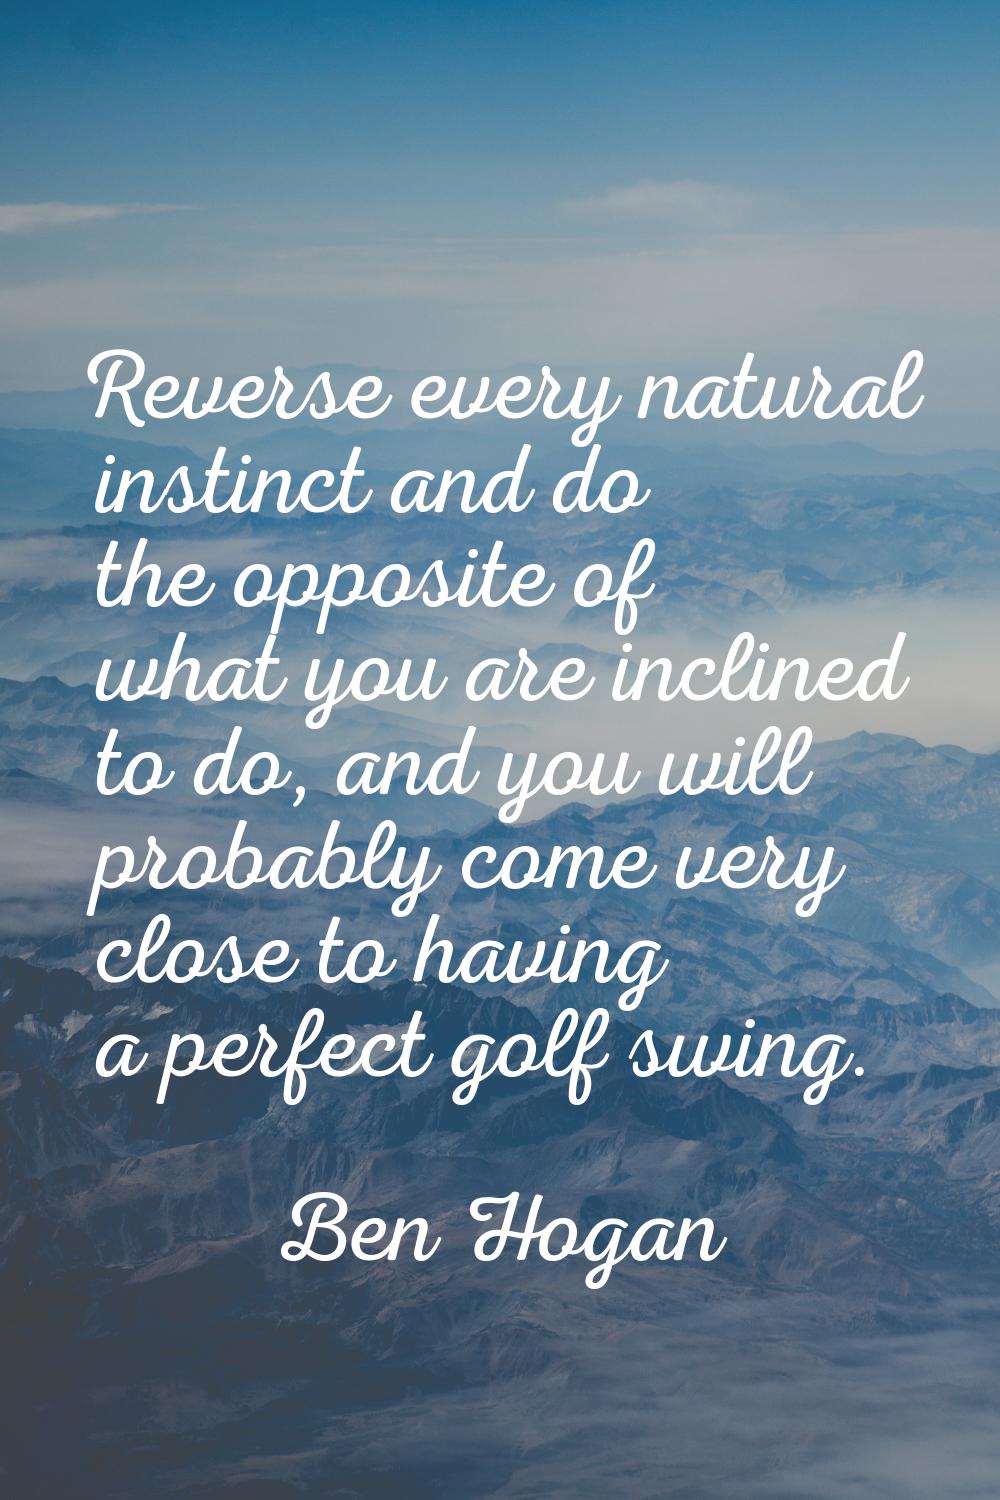 Reverse every natural instinct and do the opposite of what you are inclined to do, and you will pro